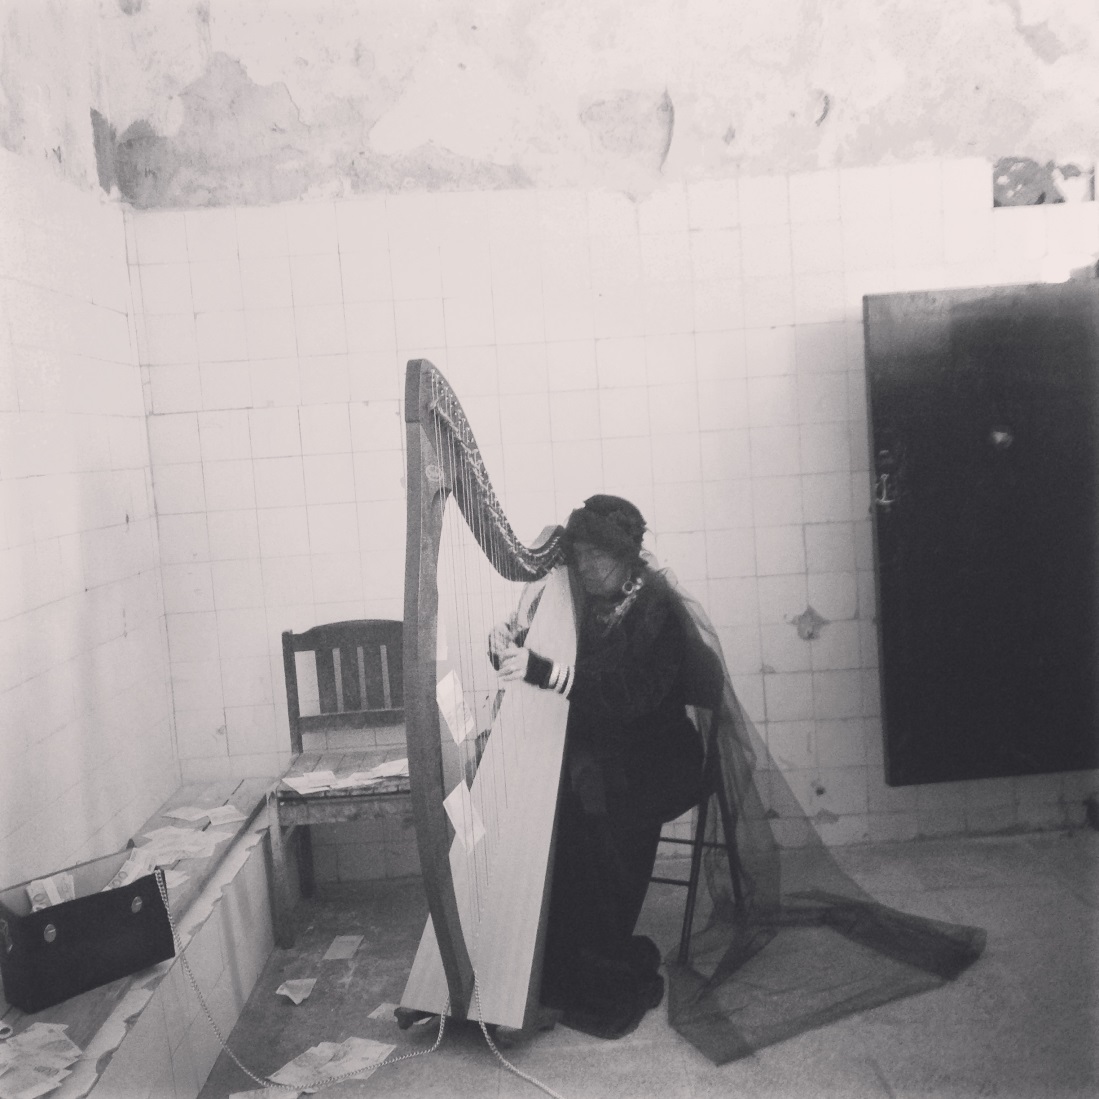 A musician performing on a traditional harp